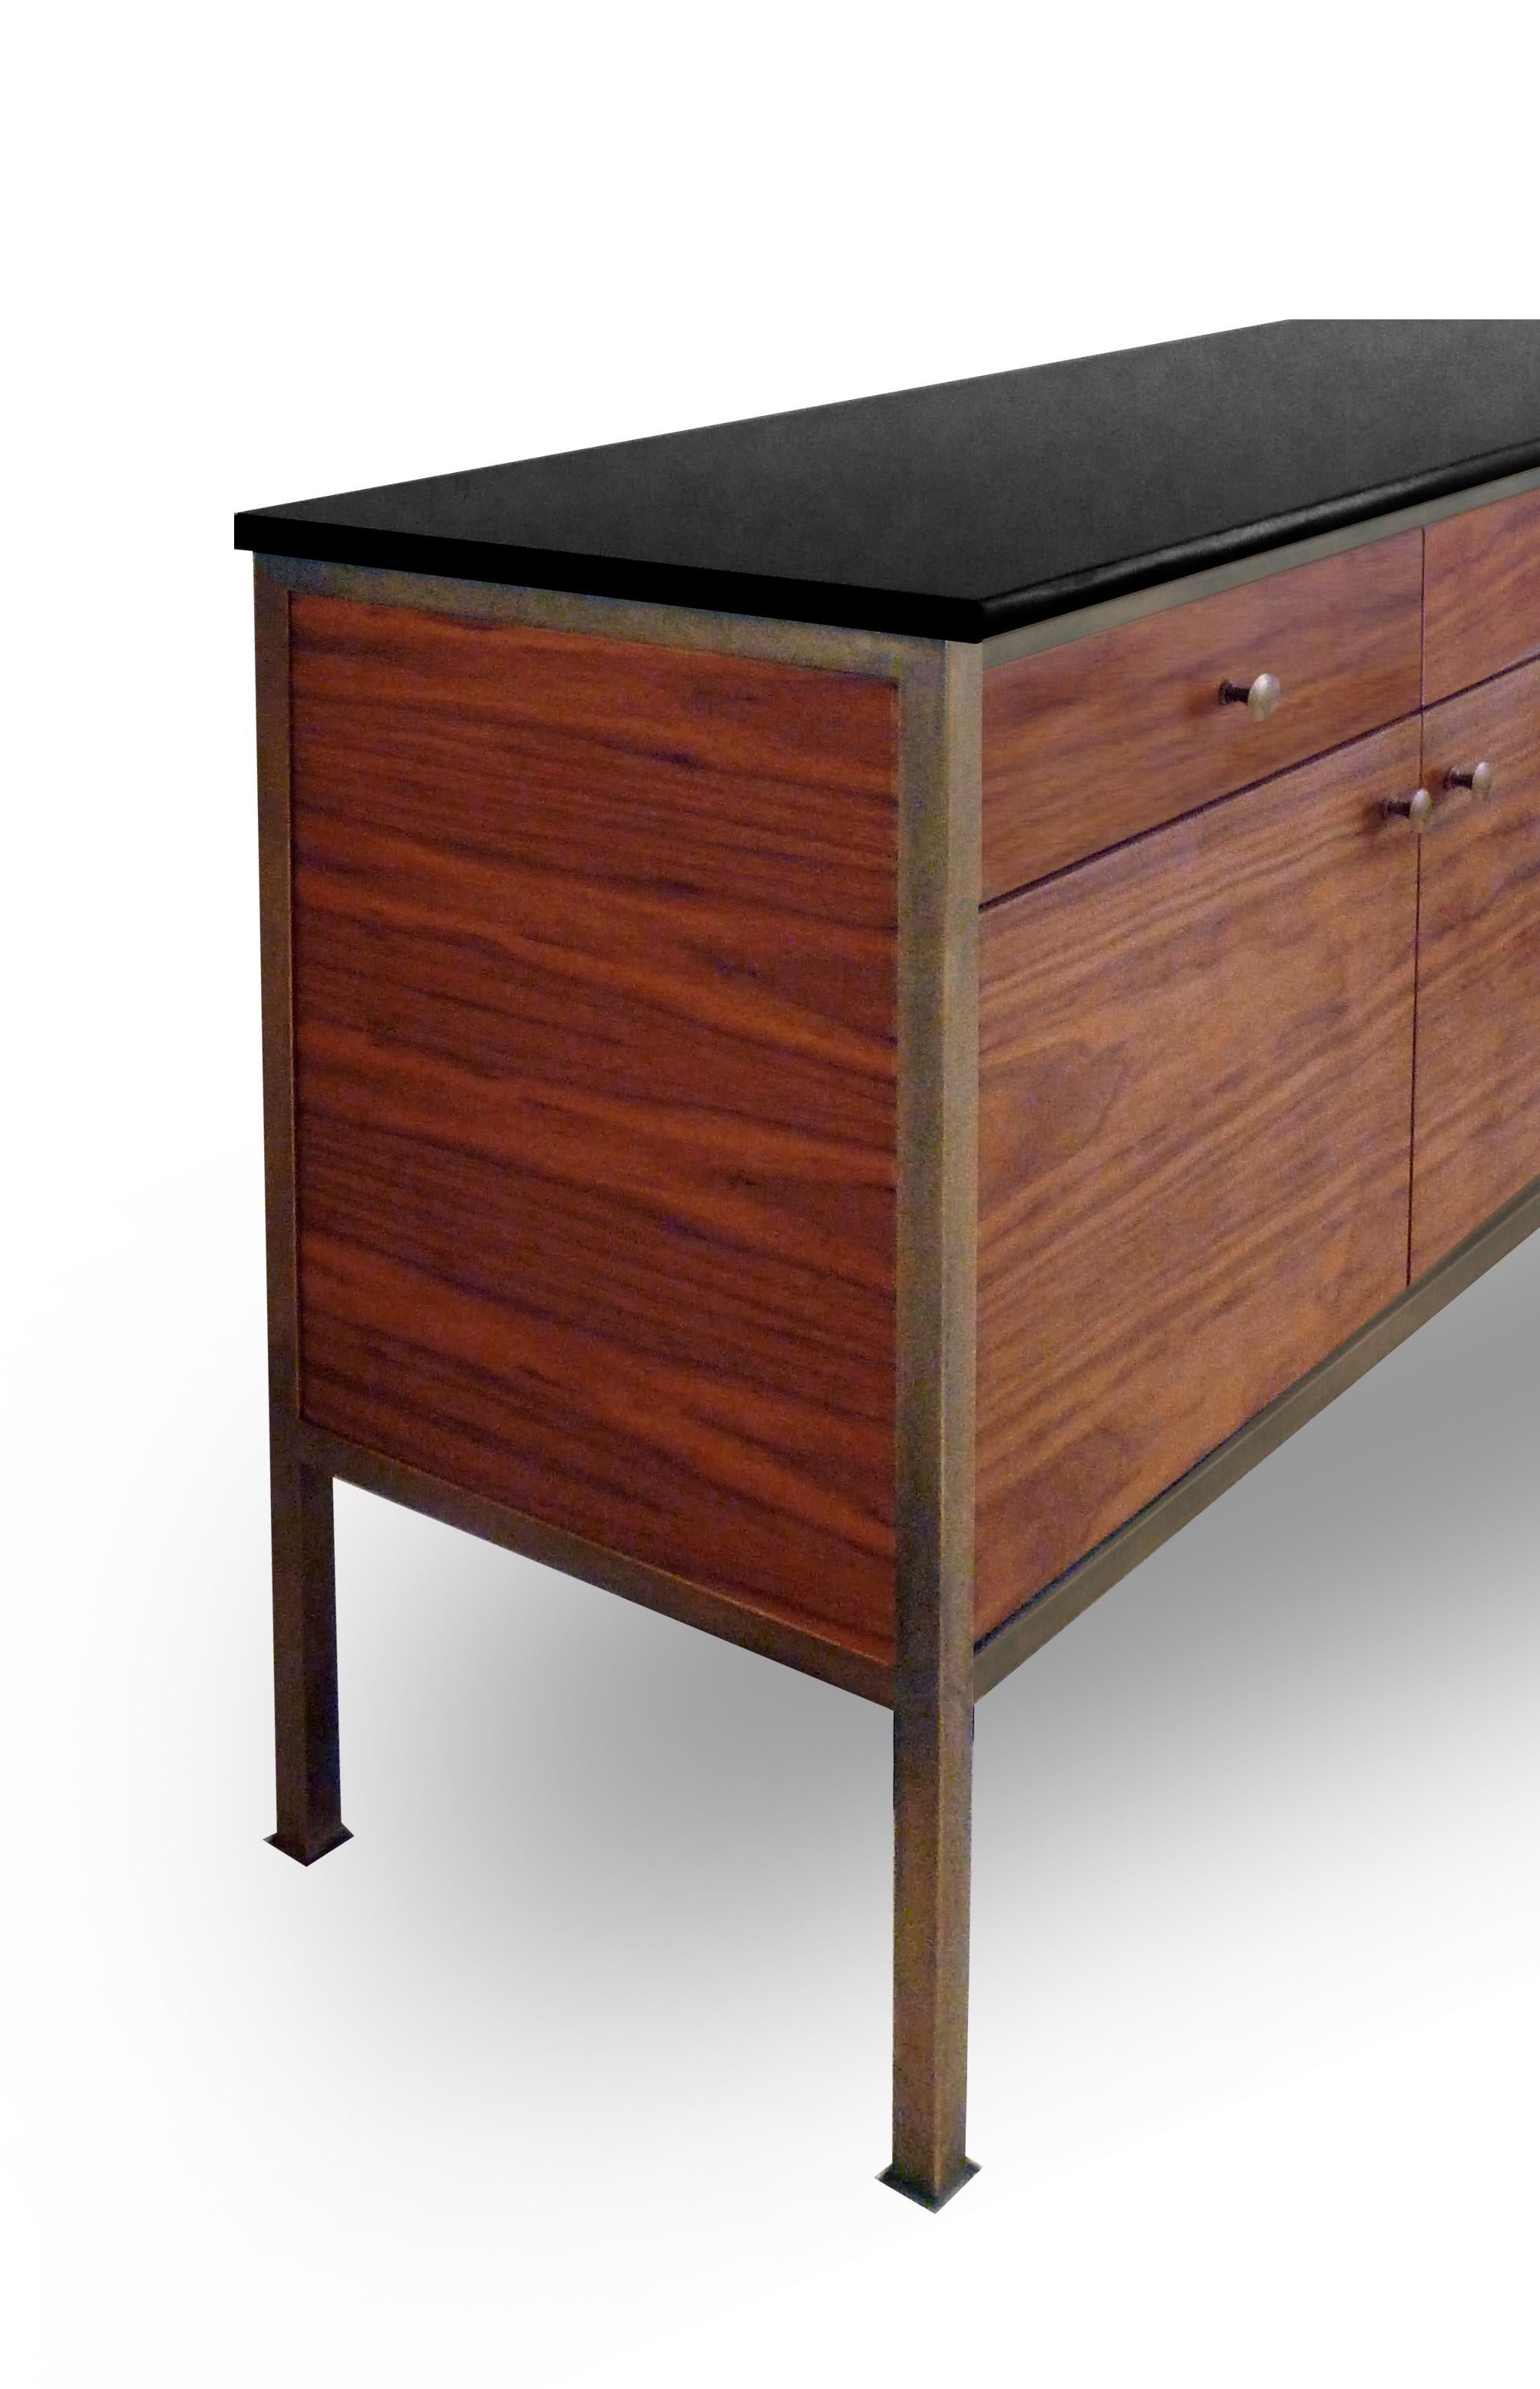 The 90° Stone Top & Walnut Buffet Cabinet features a frame made of 1